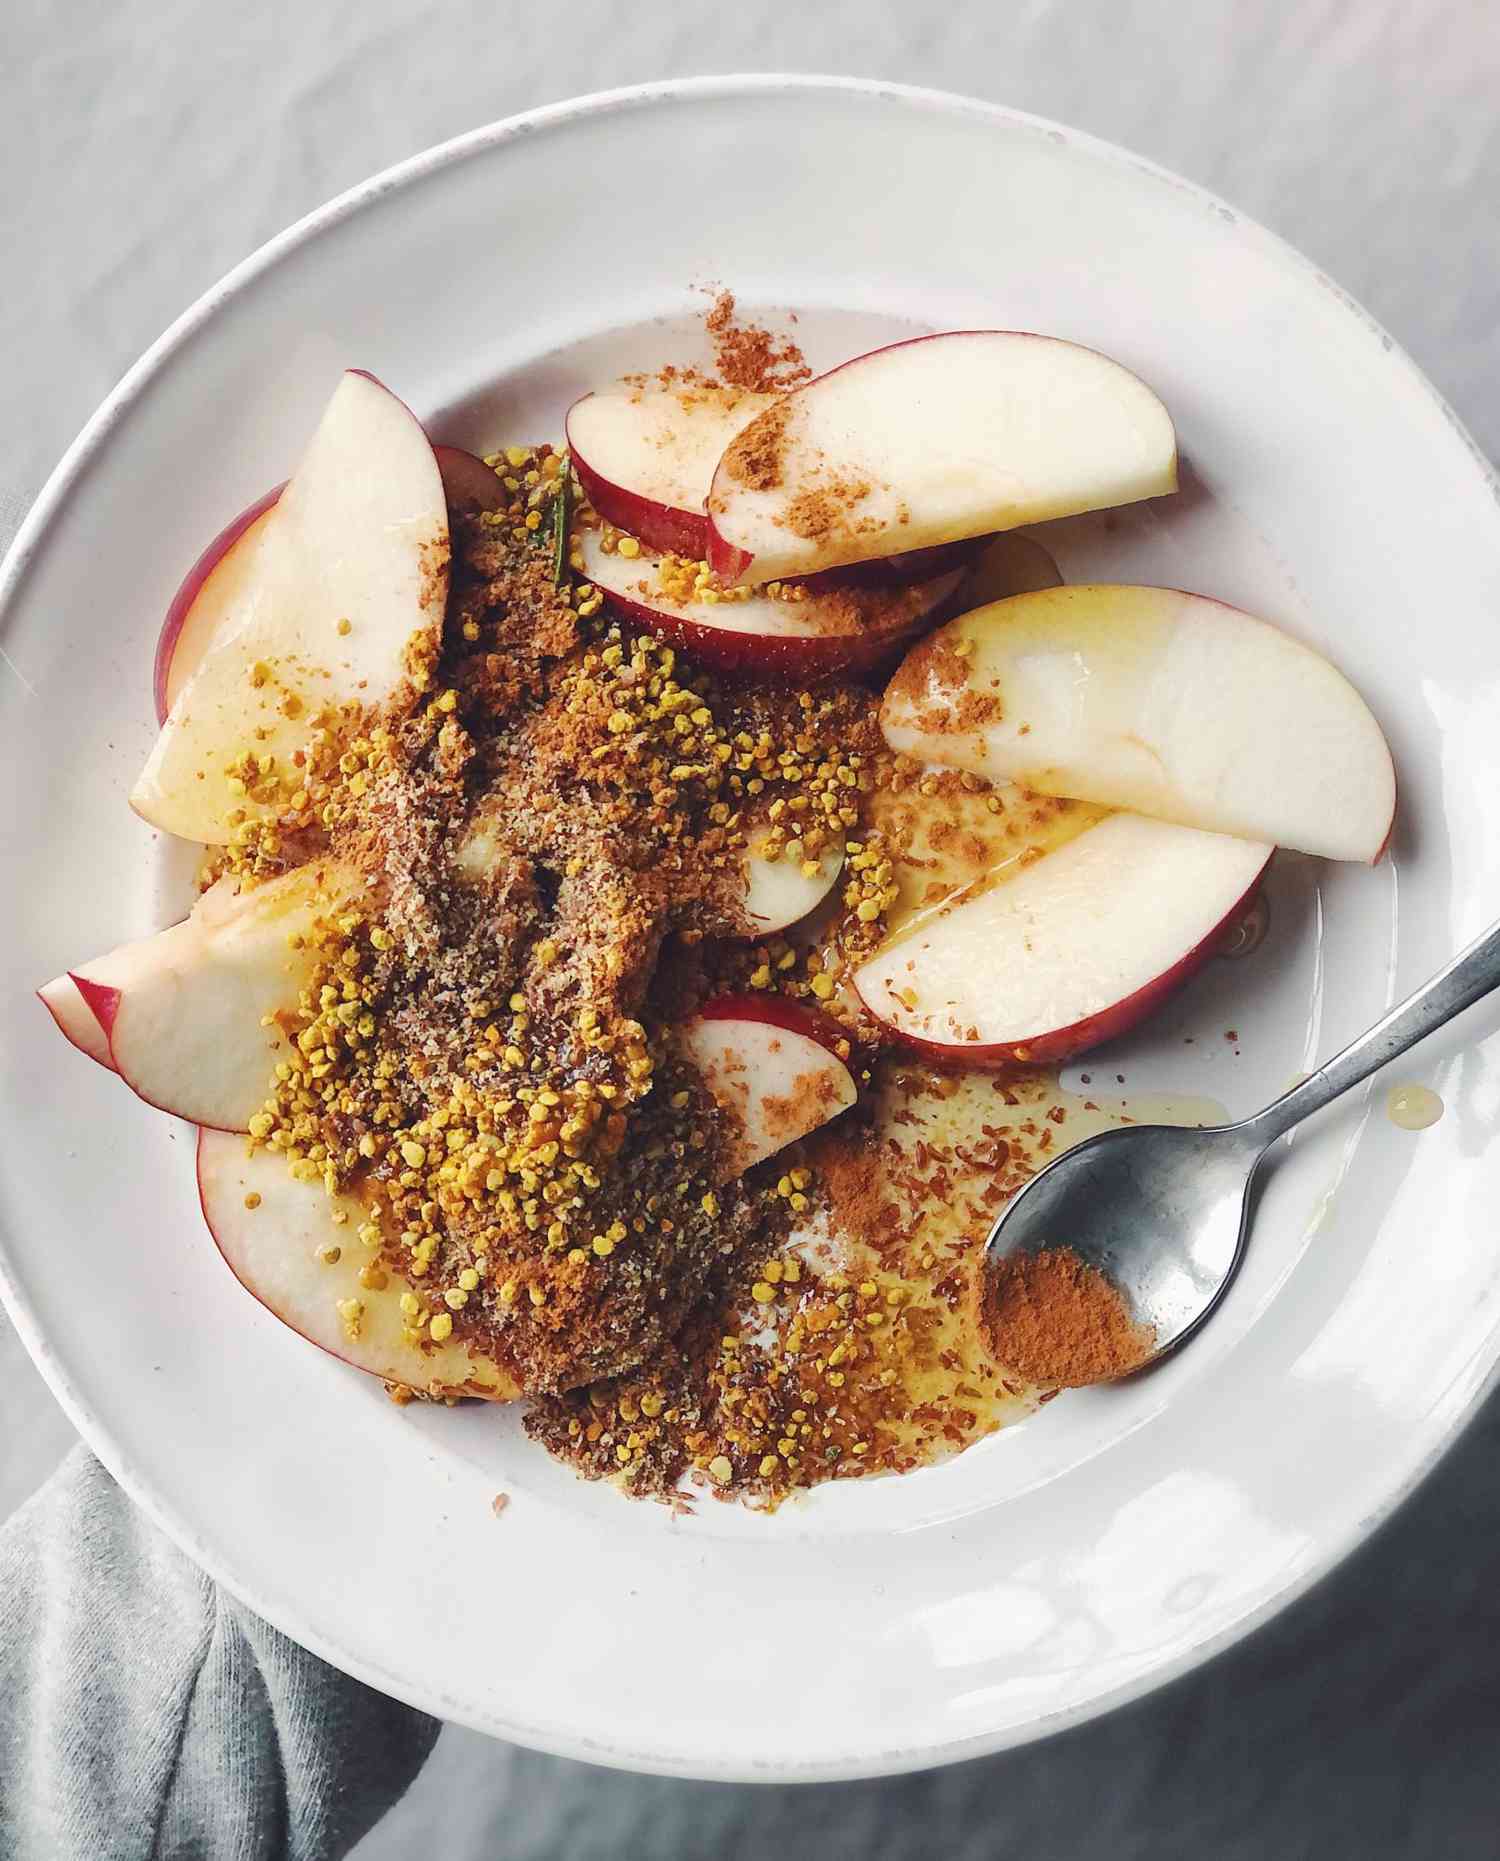 Flax seeds with apple slices